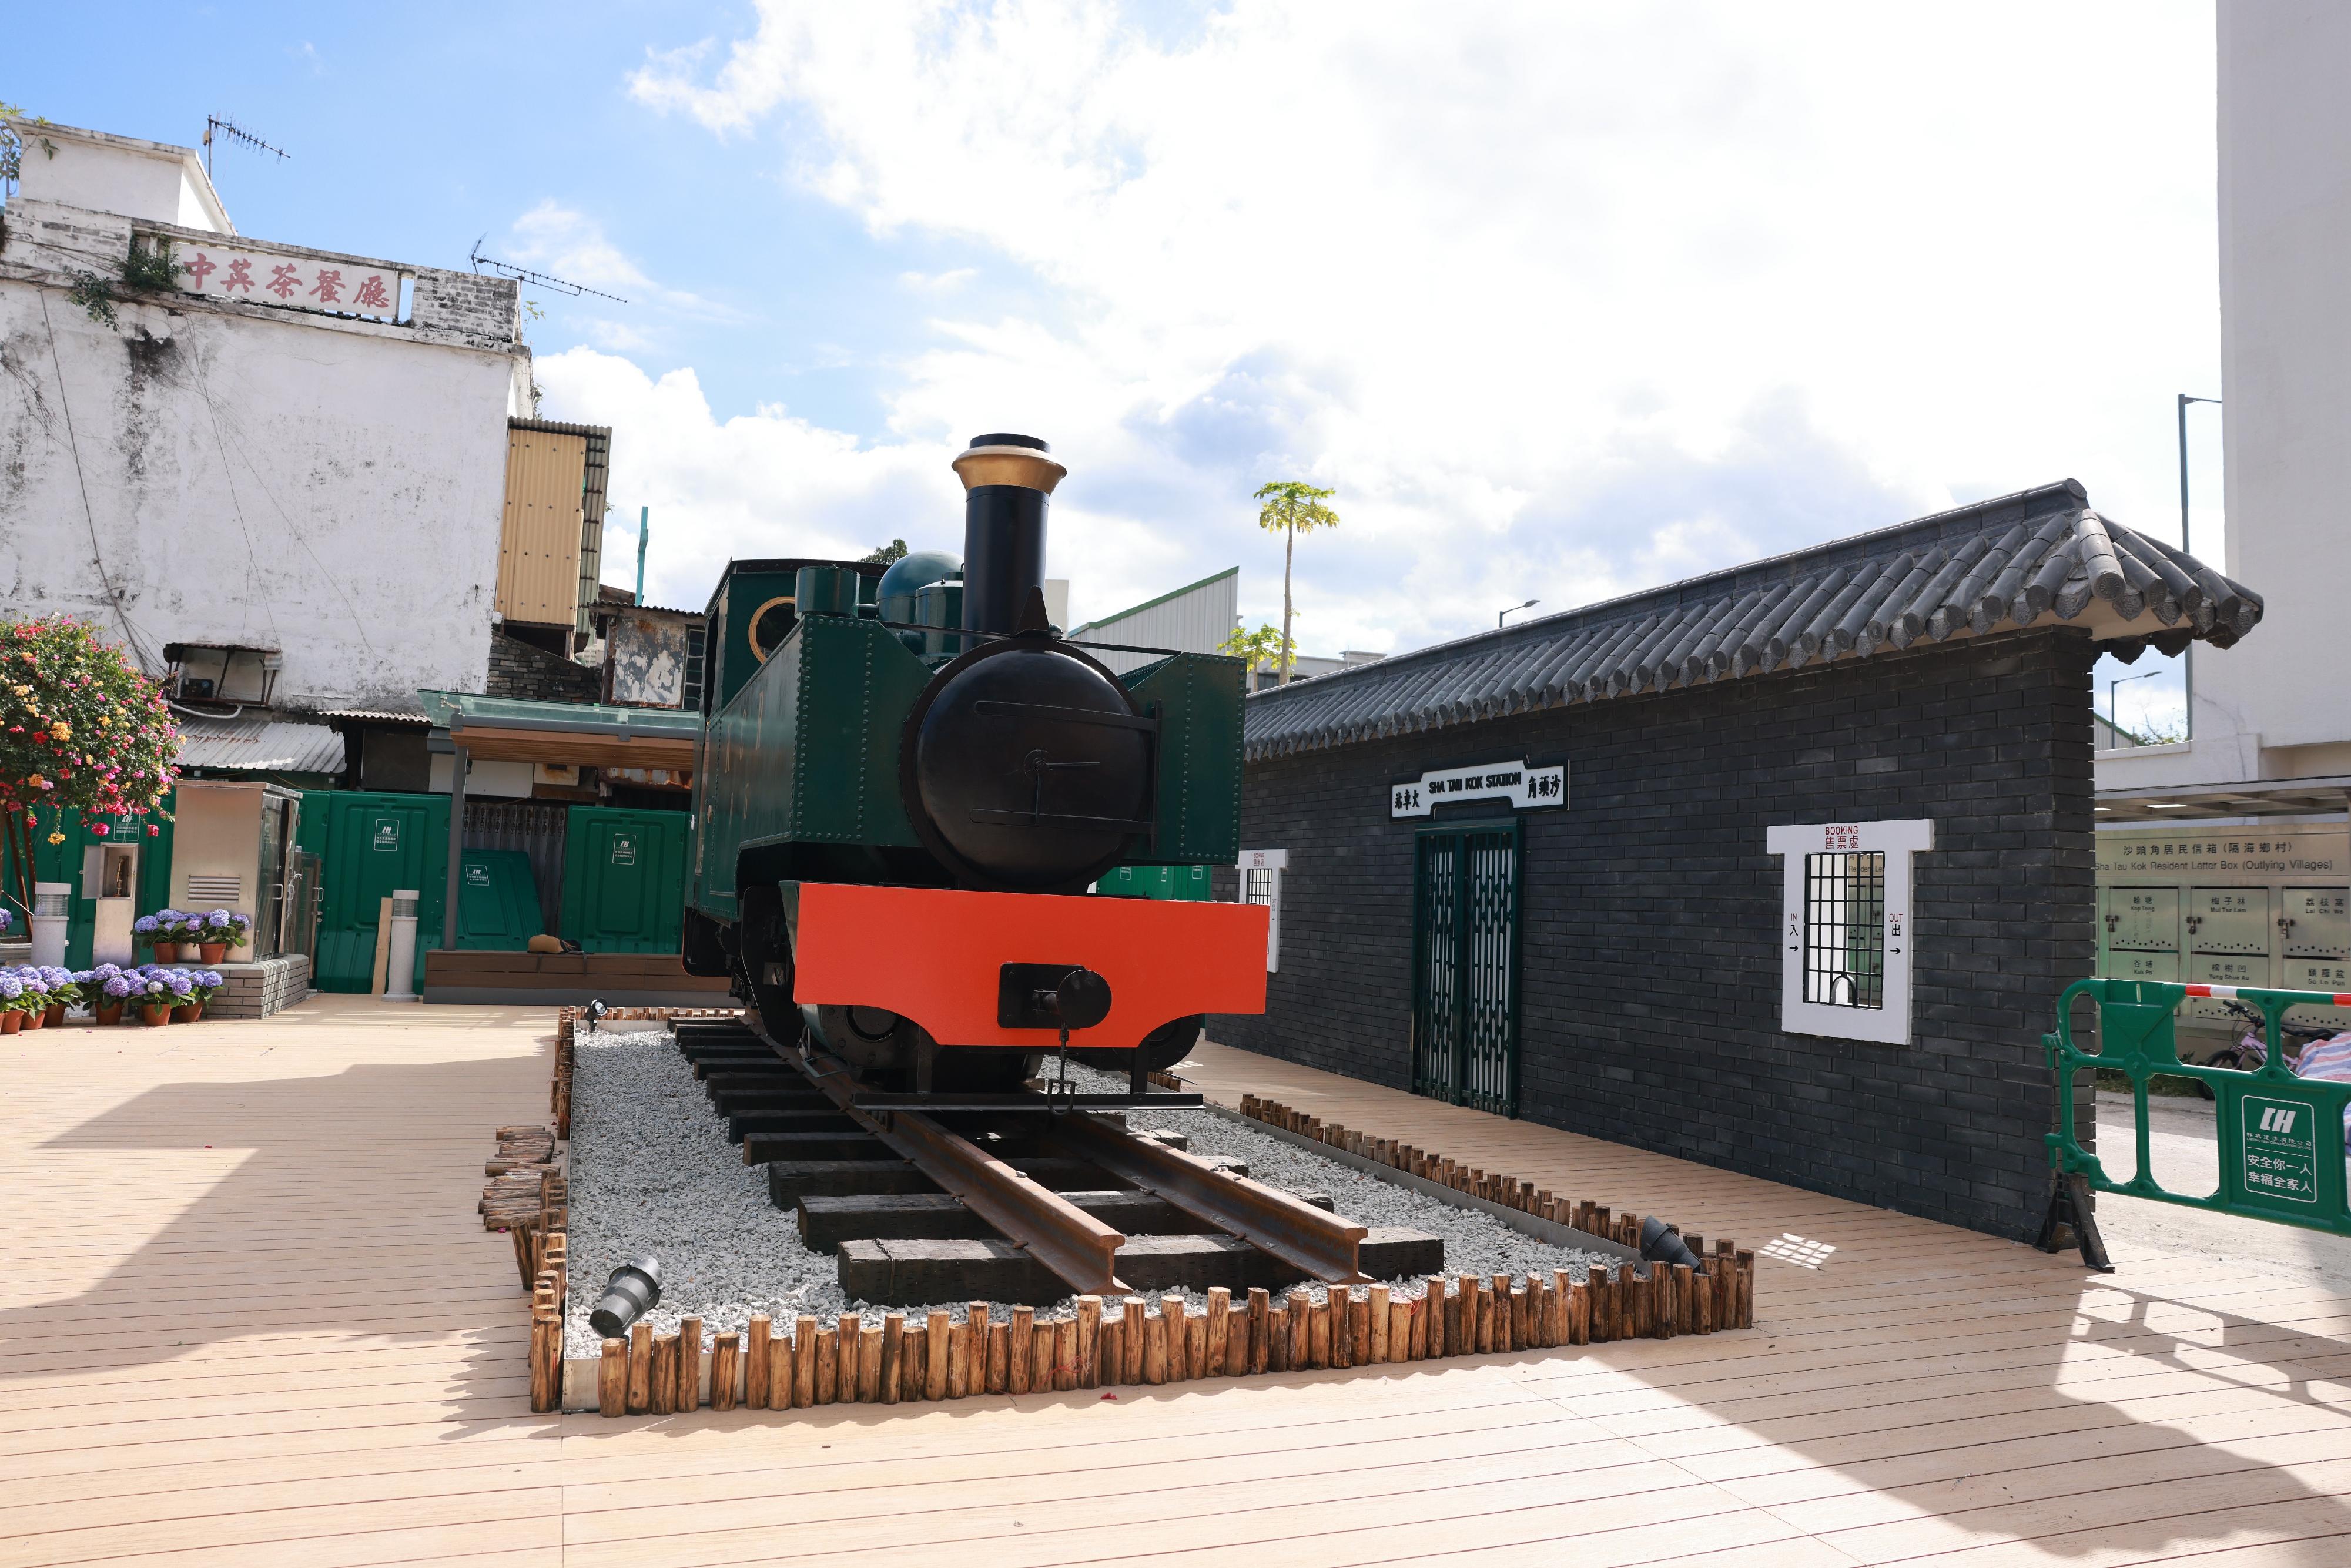 The Second Phase Opening-up of Sha Tau Kok will begin on January 1 next year. Initially, up to 1,000 tourists per day will be allowed to visit all parts of Sha Tau Kok, except Chung Ying Street, after applying online for a Closed Area Permit. Photo shows a replica of an old railway station in Hong Kong and a model actual-size locomotive at the Chung Ying Street Garden.
